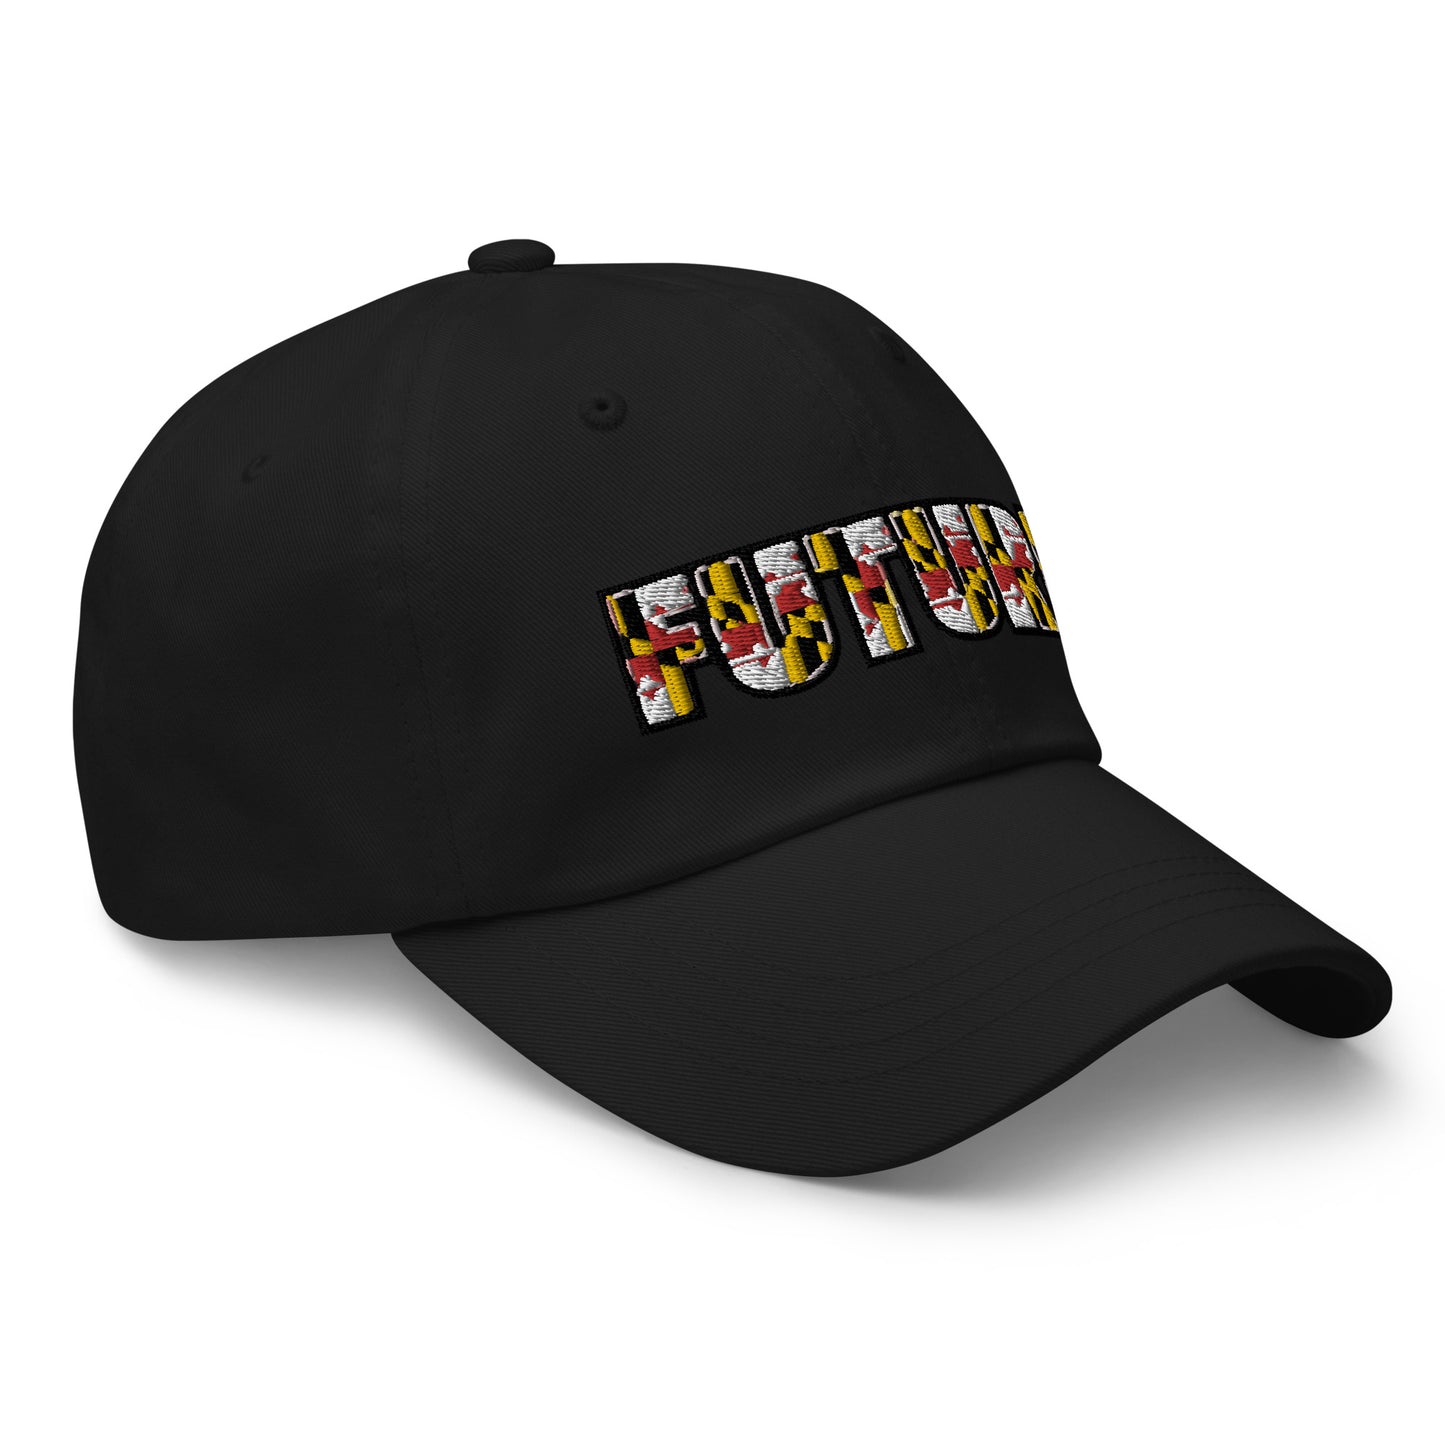 FUTURE Embroidered Hat